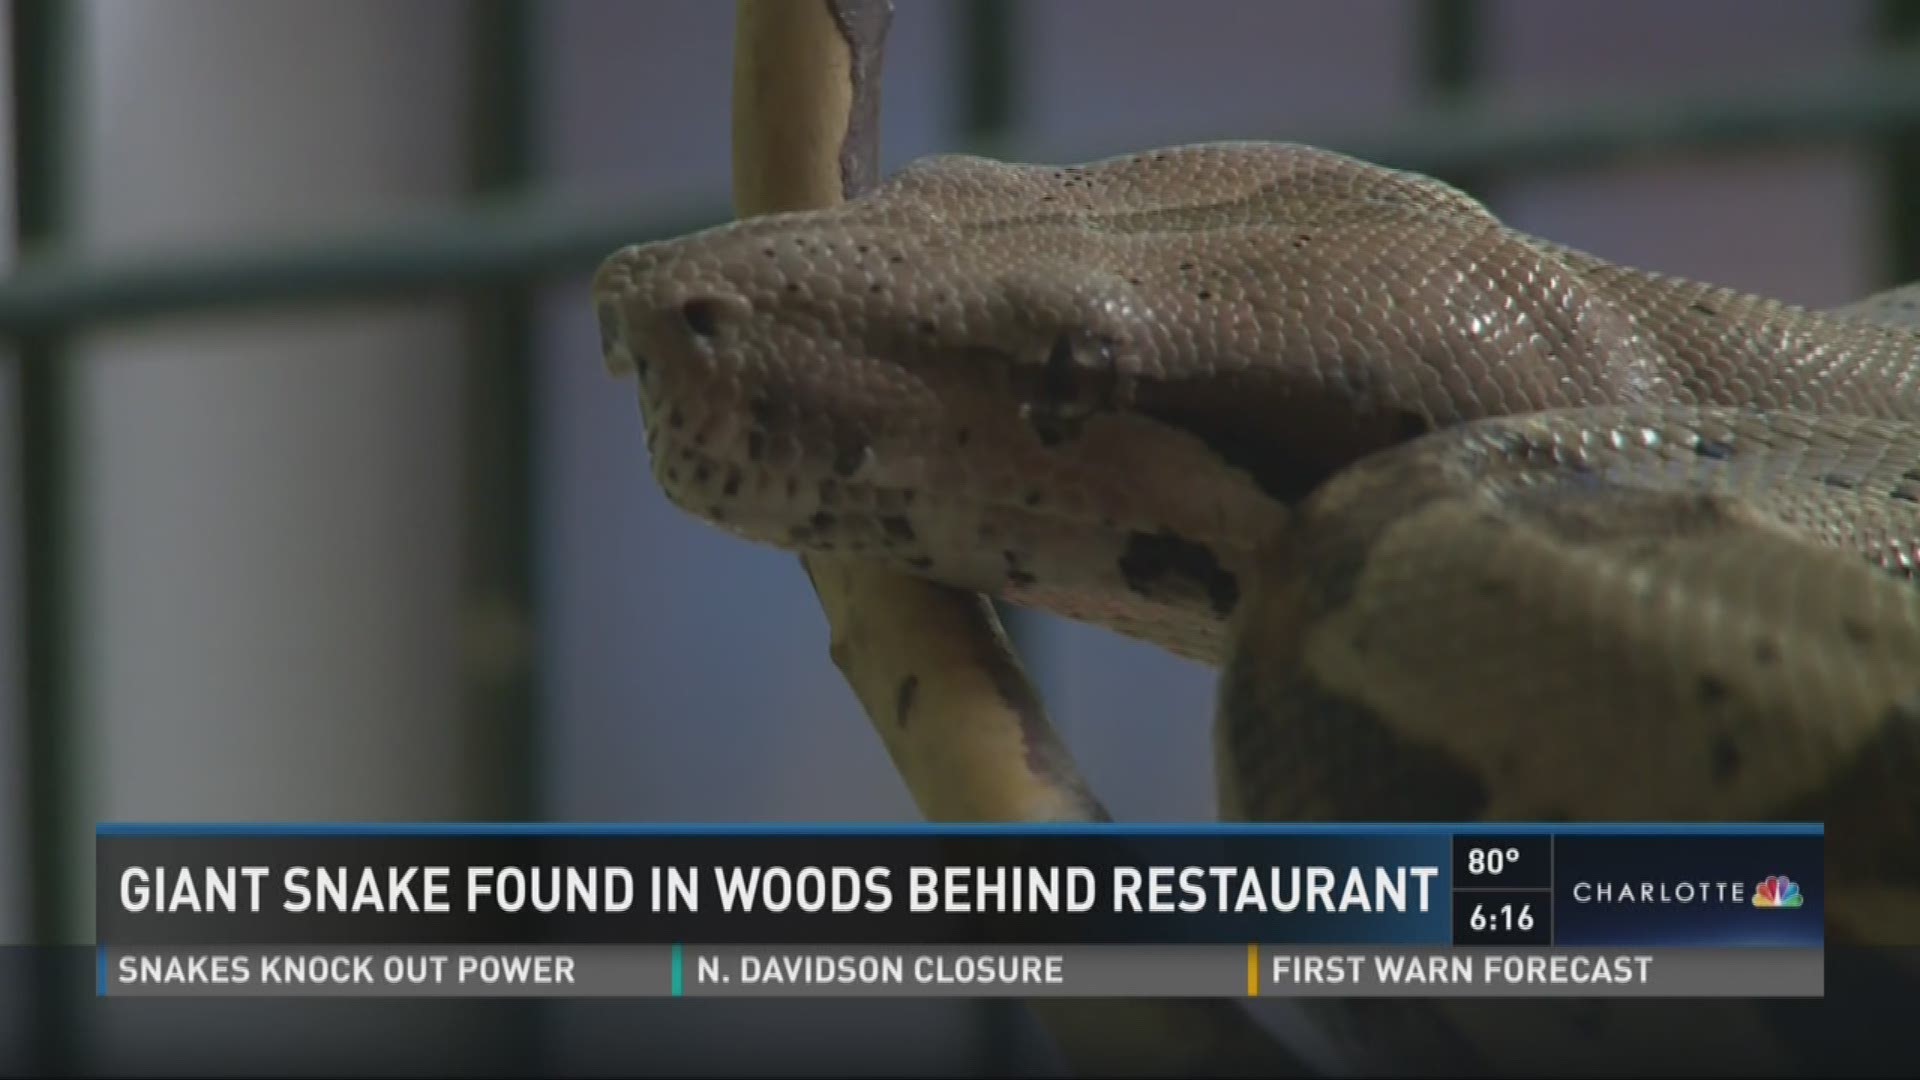 A giant python was found behind a restaurant in Matthews, scaring several residents.